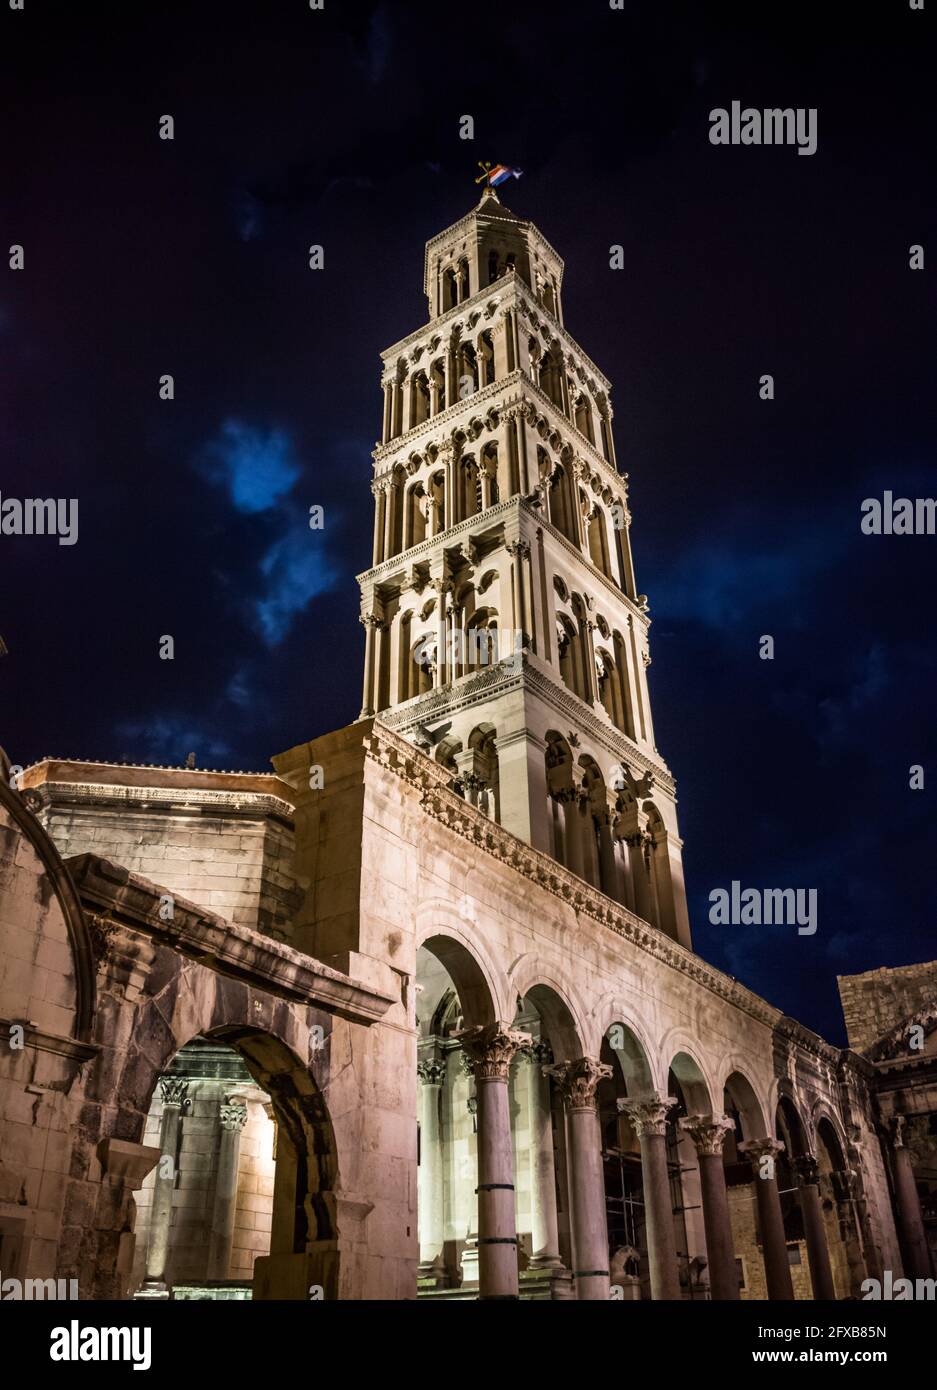 The Bell tower of the Cathedral of St. Dominius overlooking the Diocletian Palace in old town Split, the second largest city in Croatia Stock Photo